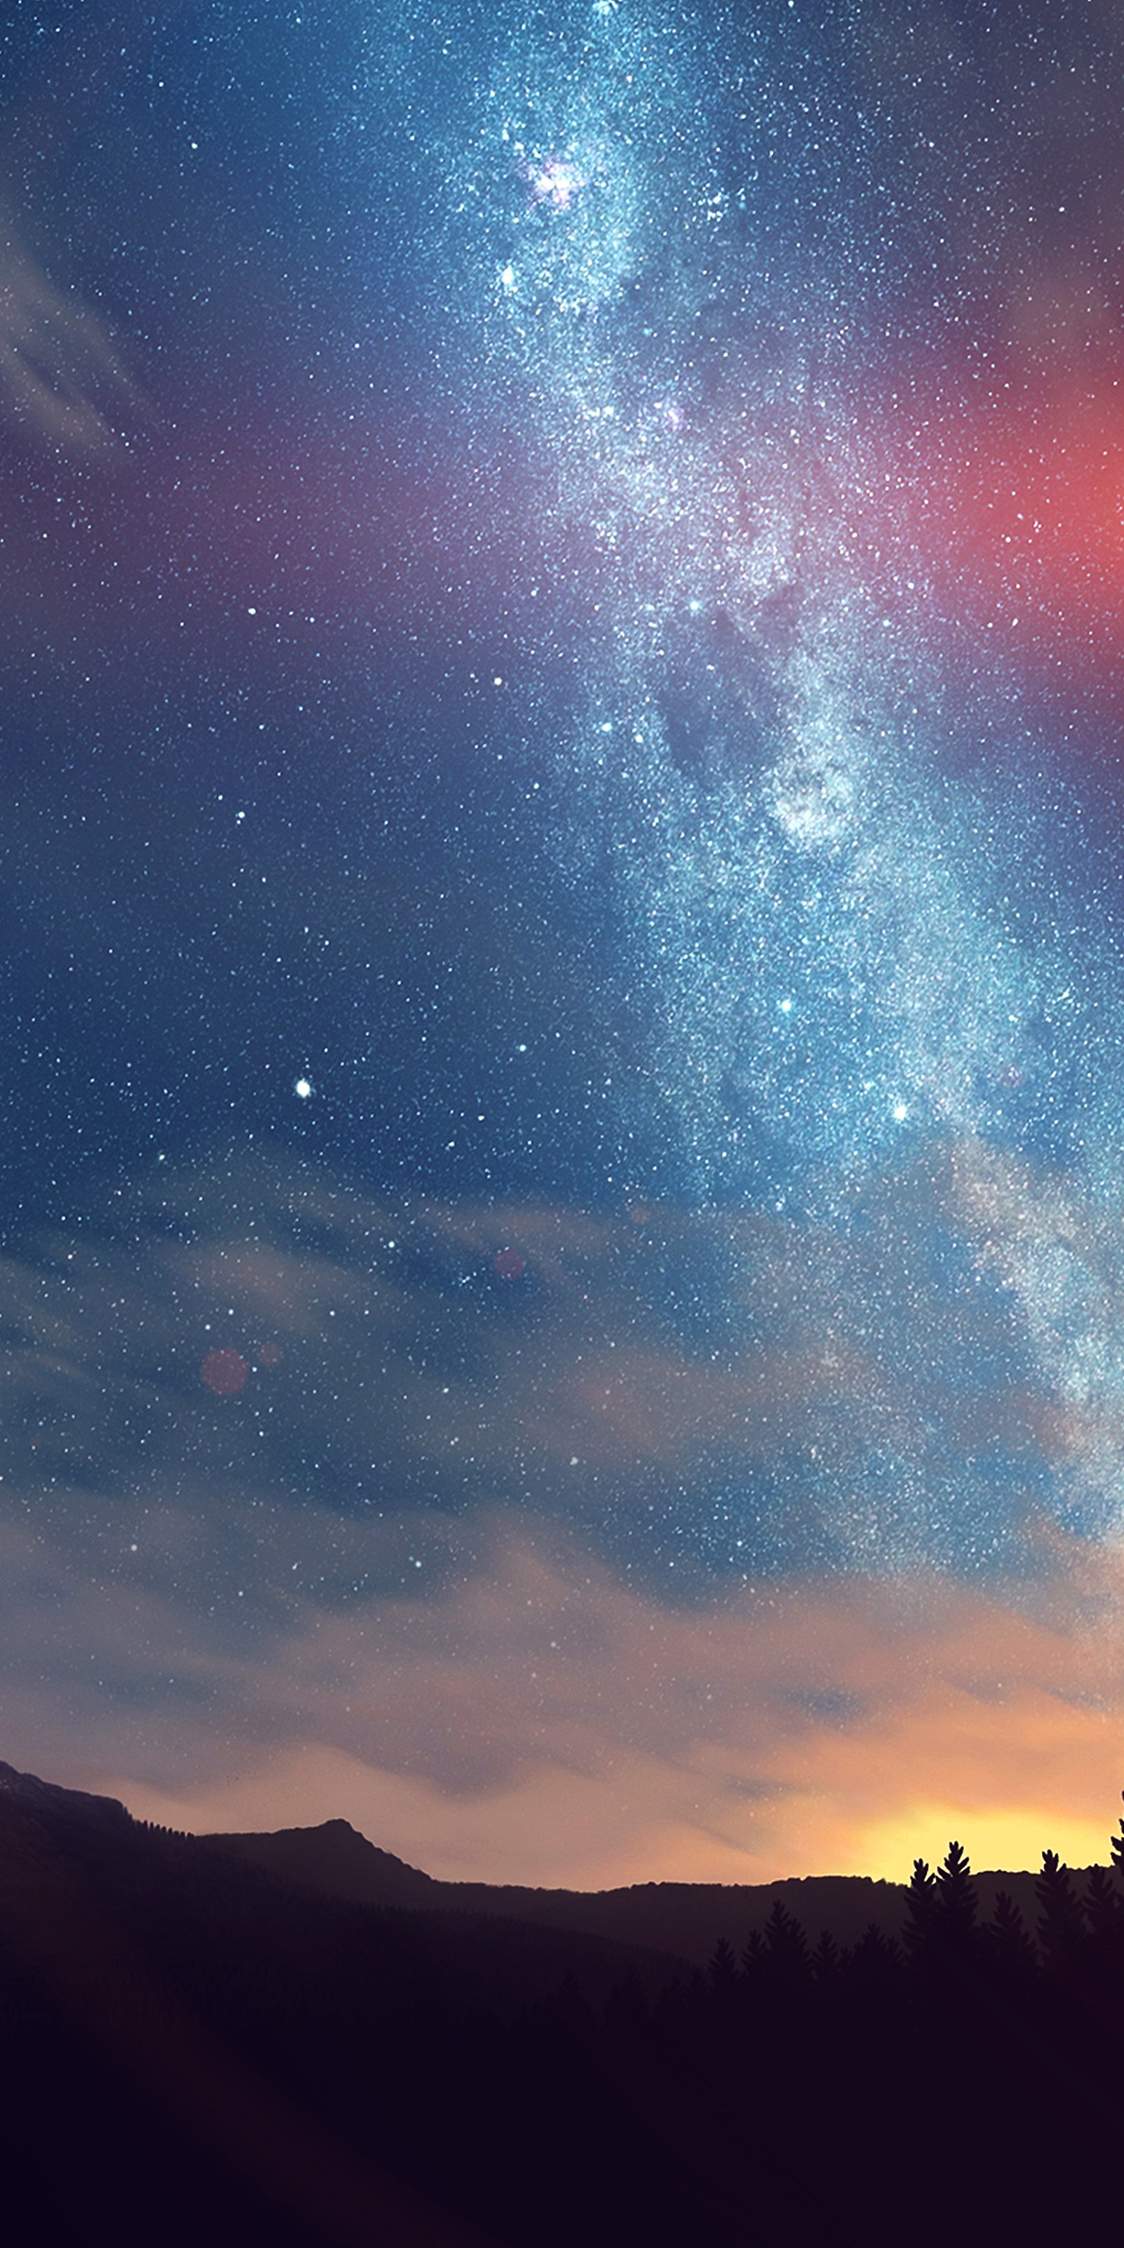 Galaxy View From Earth Starry Night IPhone Wallpaper - IPhone Wallpapers : iPhone  Wallpapers